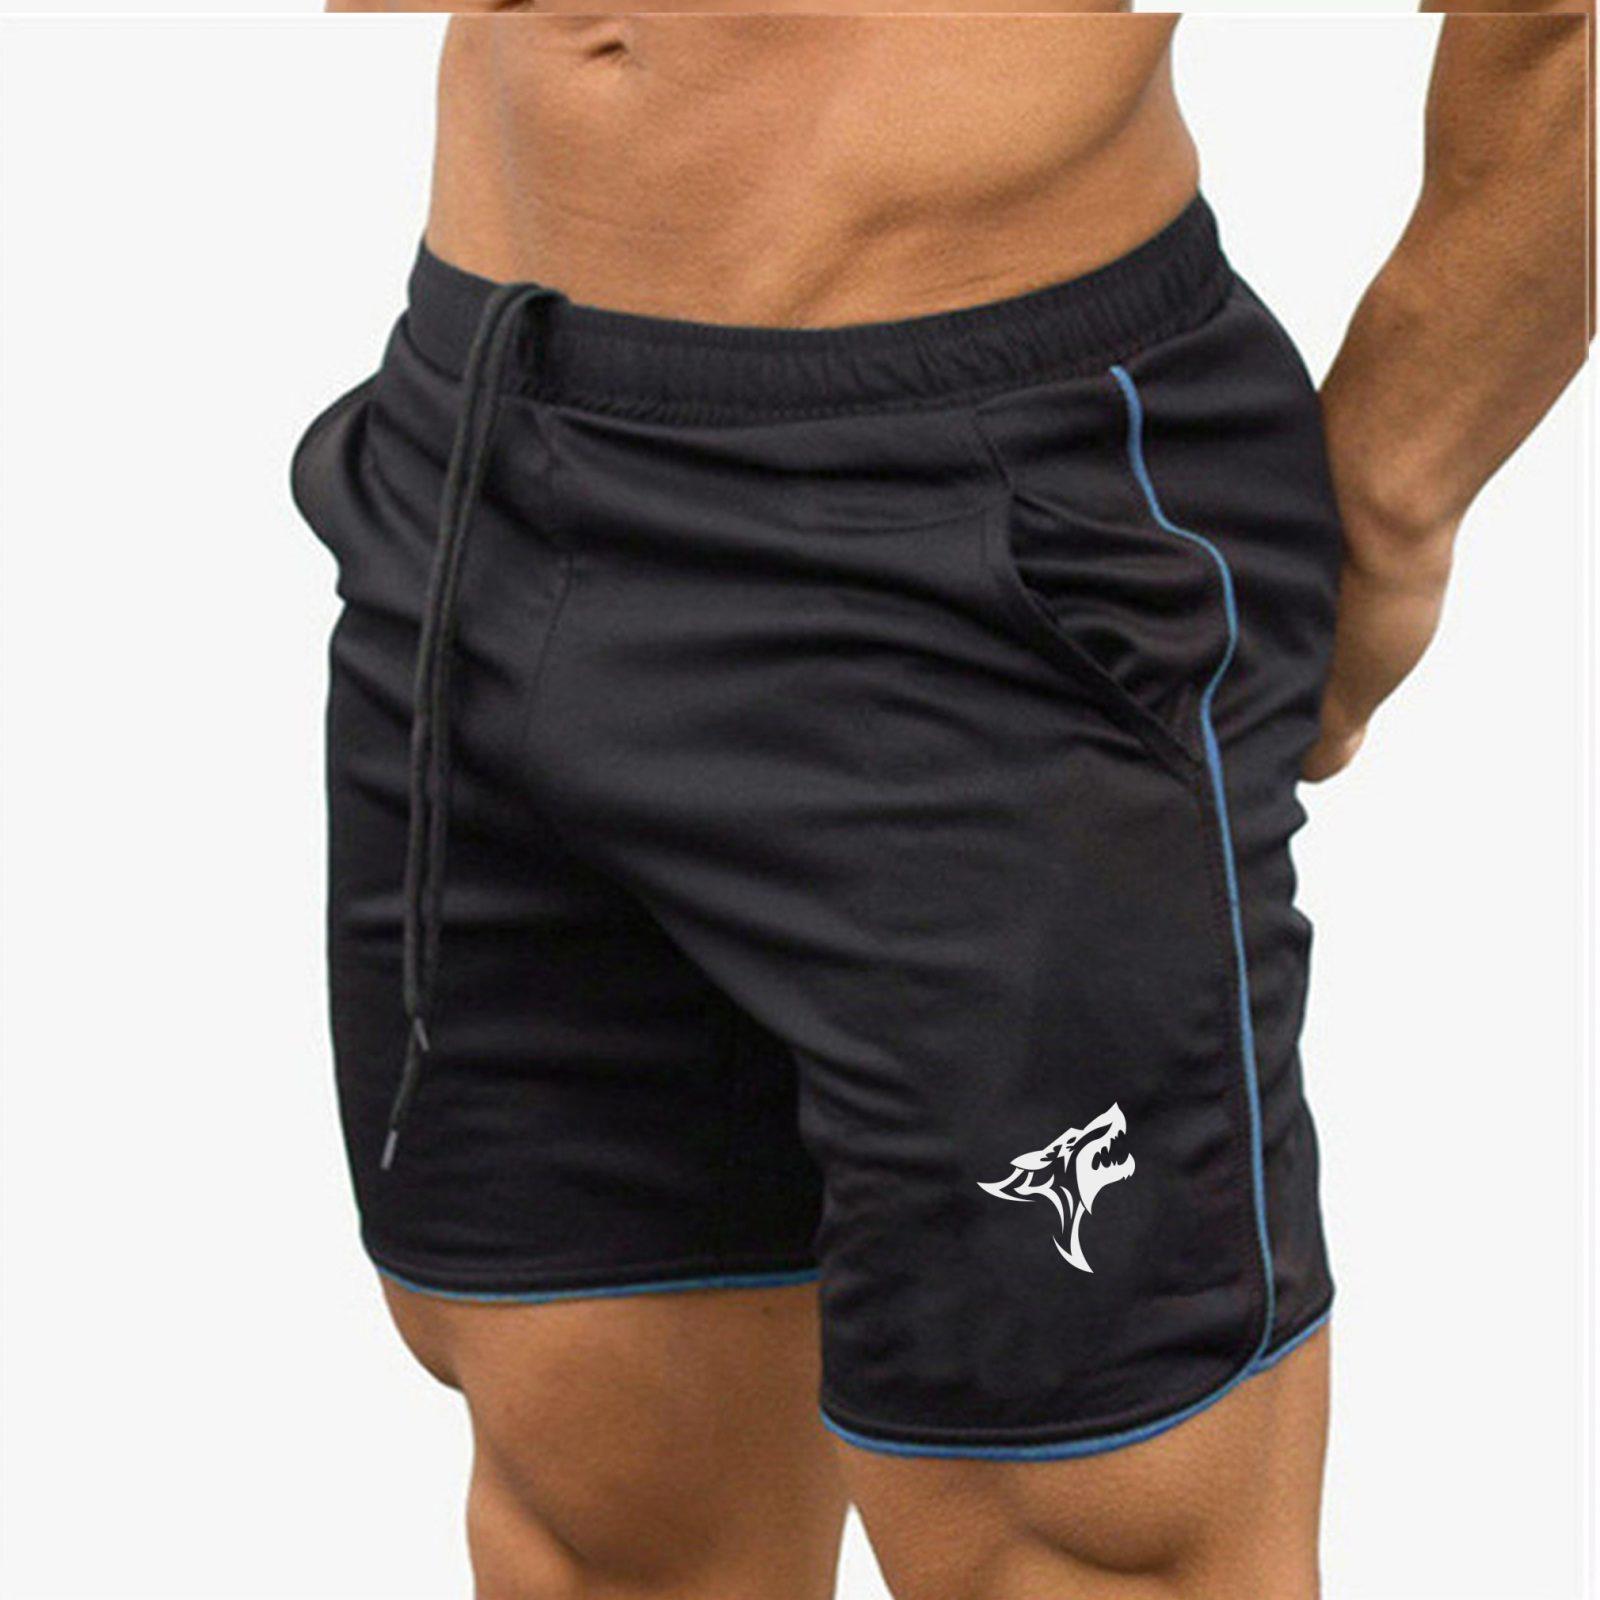 White_Lycan_shorts_black_and_blue.jpg